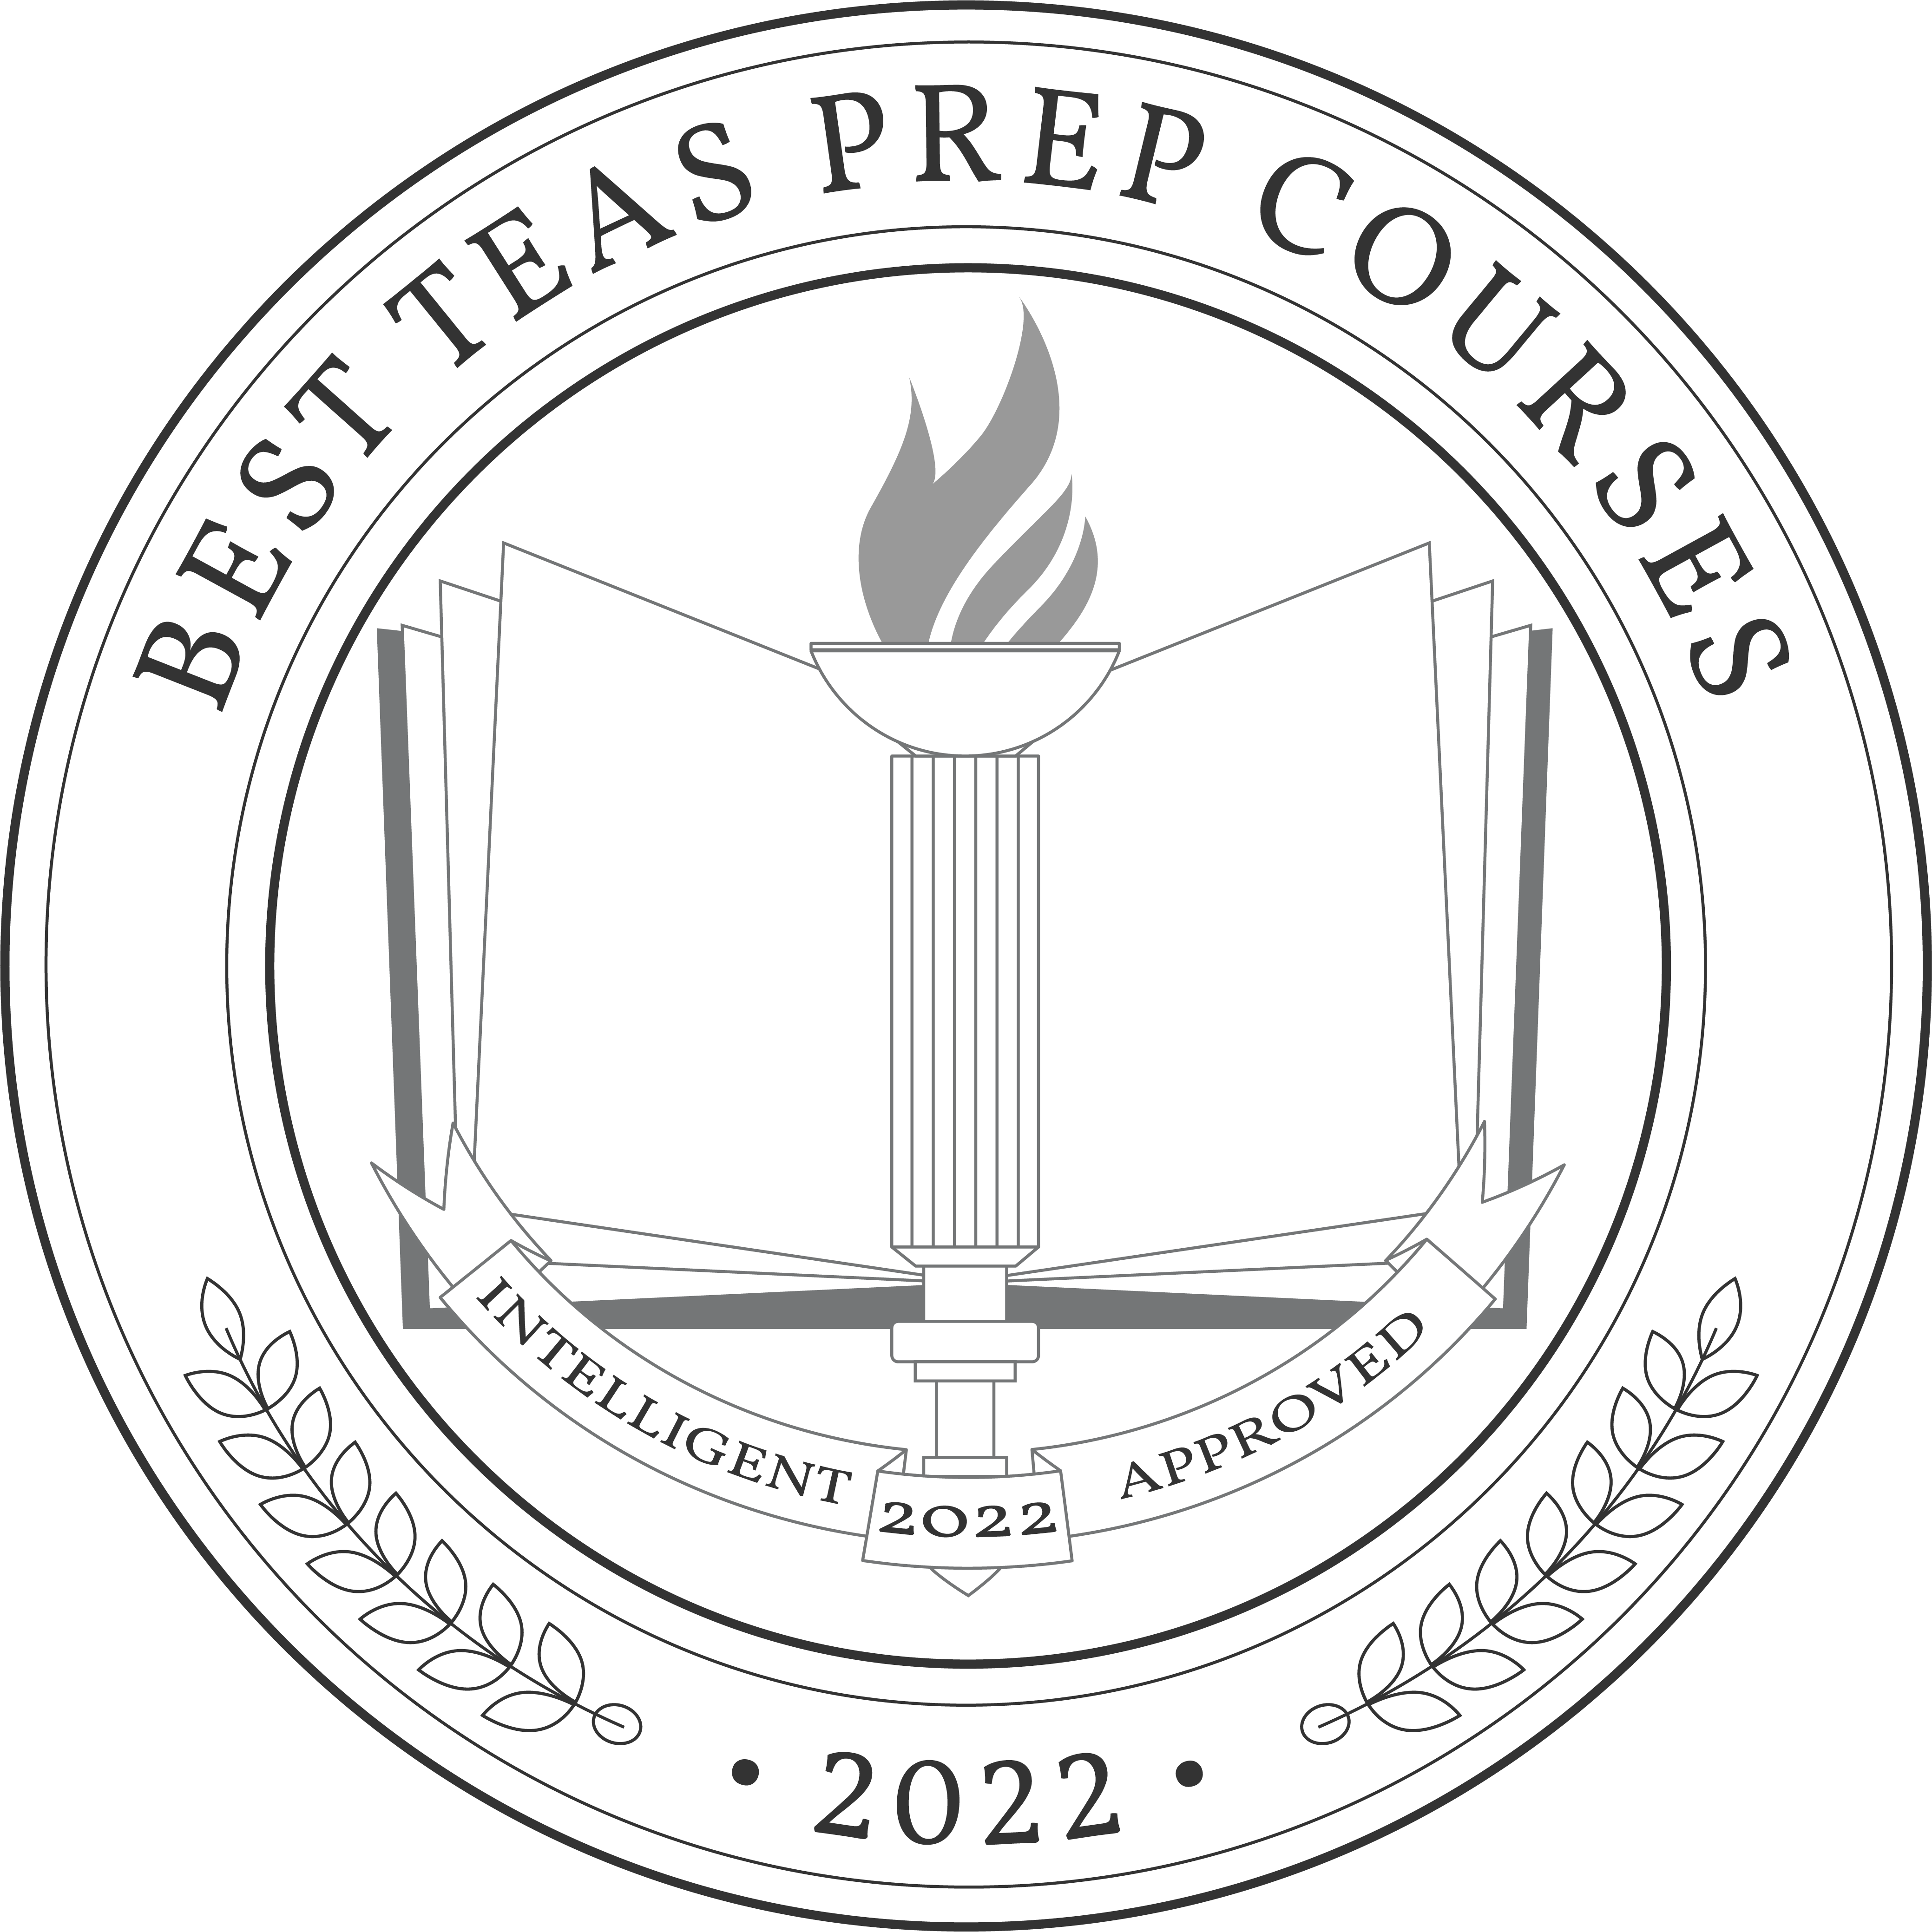 The 10 Best TEAS Prep Courses and Classes of 2022 - Intelligent